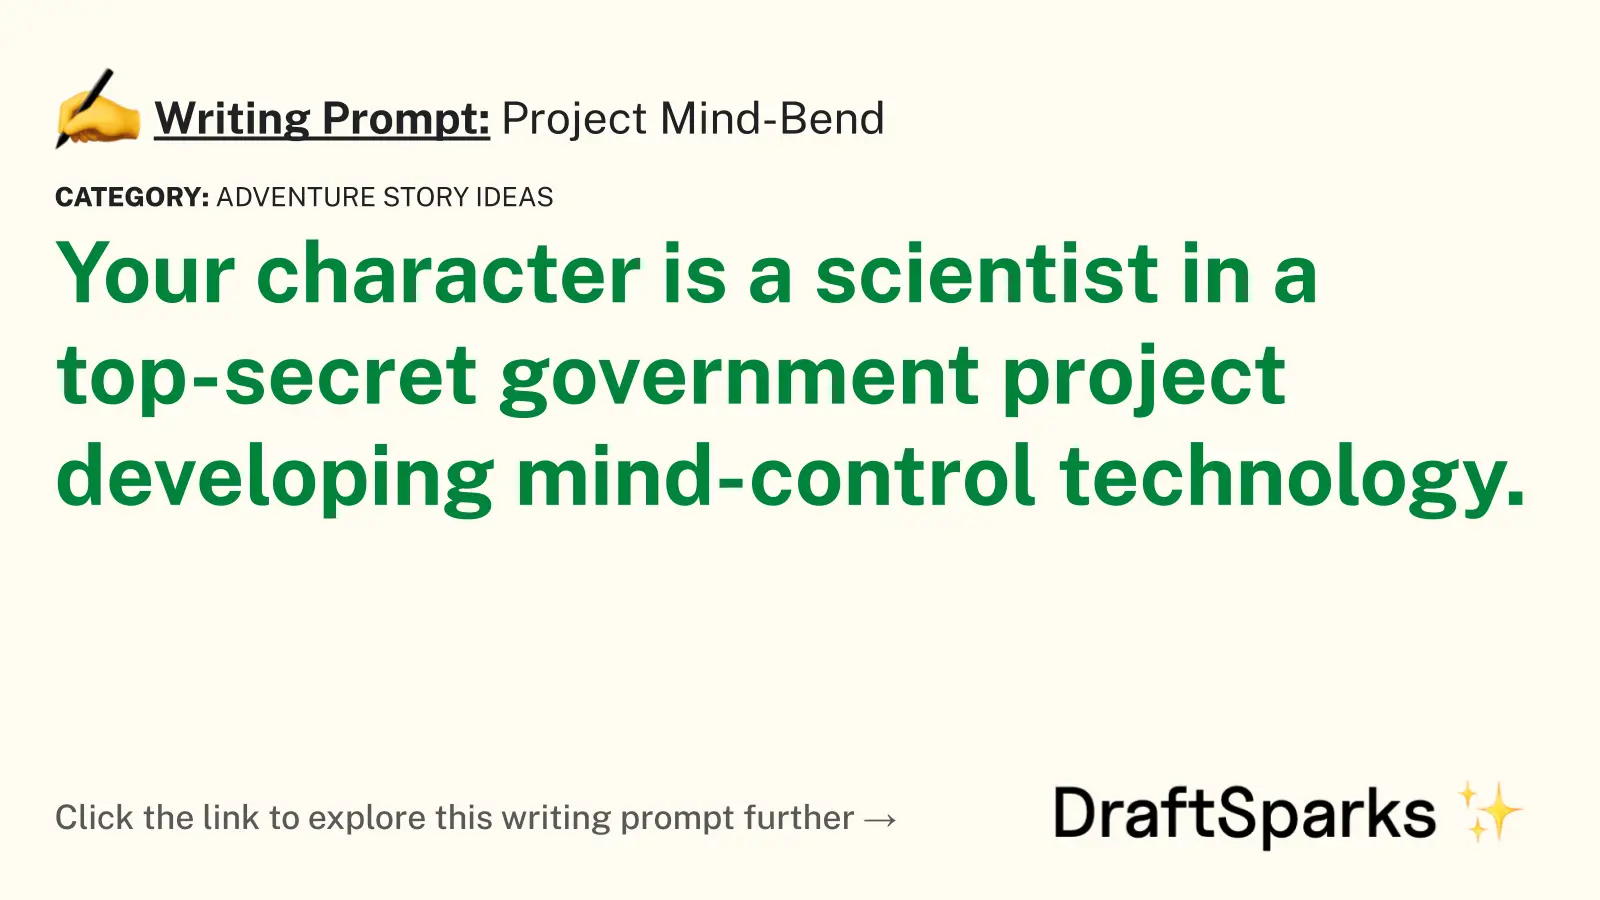 Project Mind-Bend